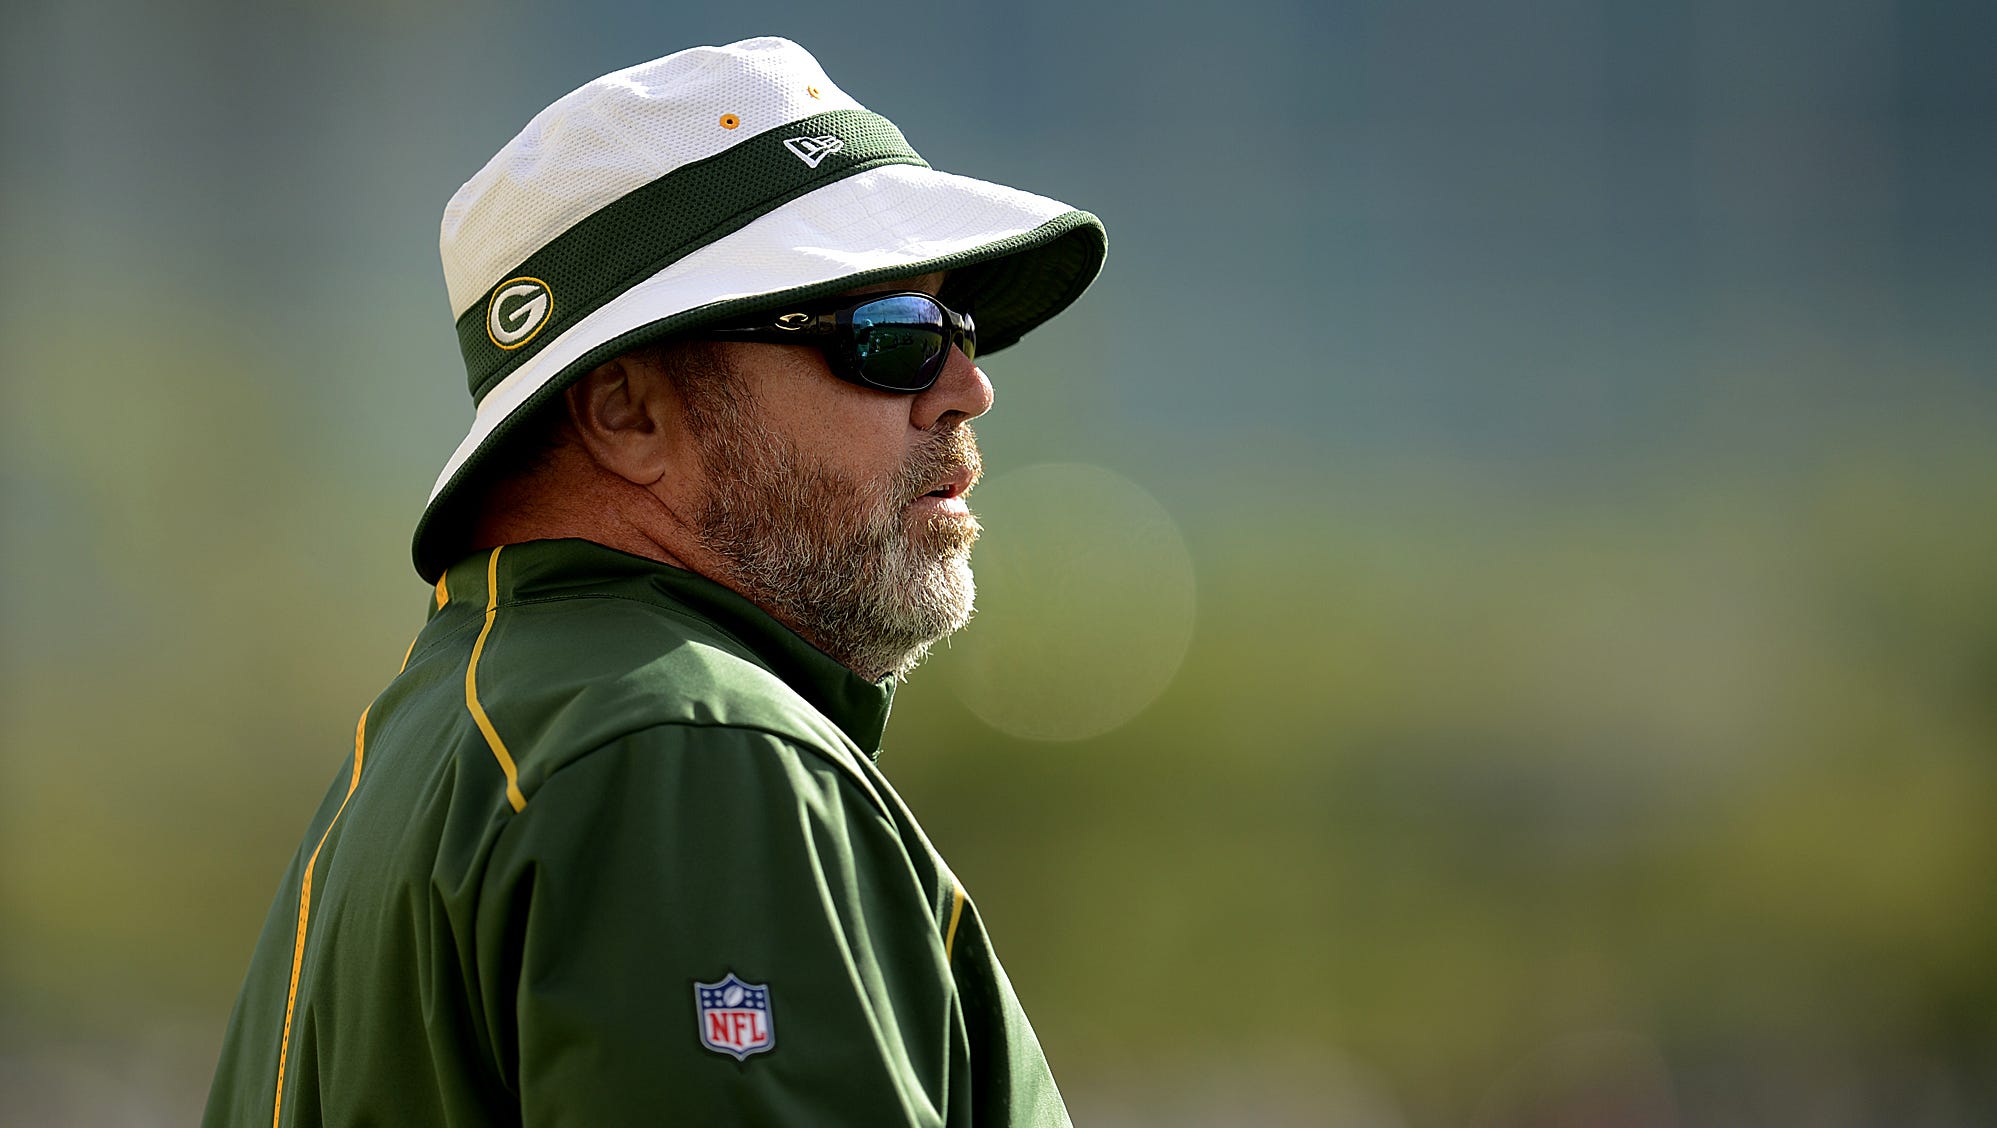 Green Bay Packers coach Mike McCarthy looks on during training camp practice on Aug. 4, 2015, at Ray Nitschke Field.